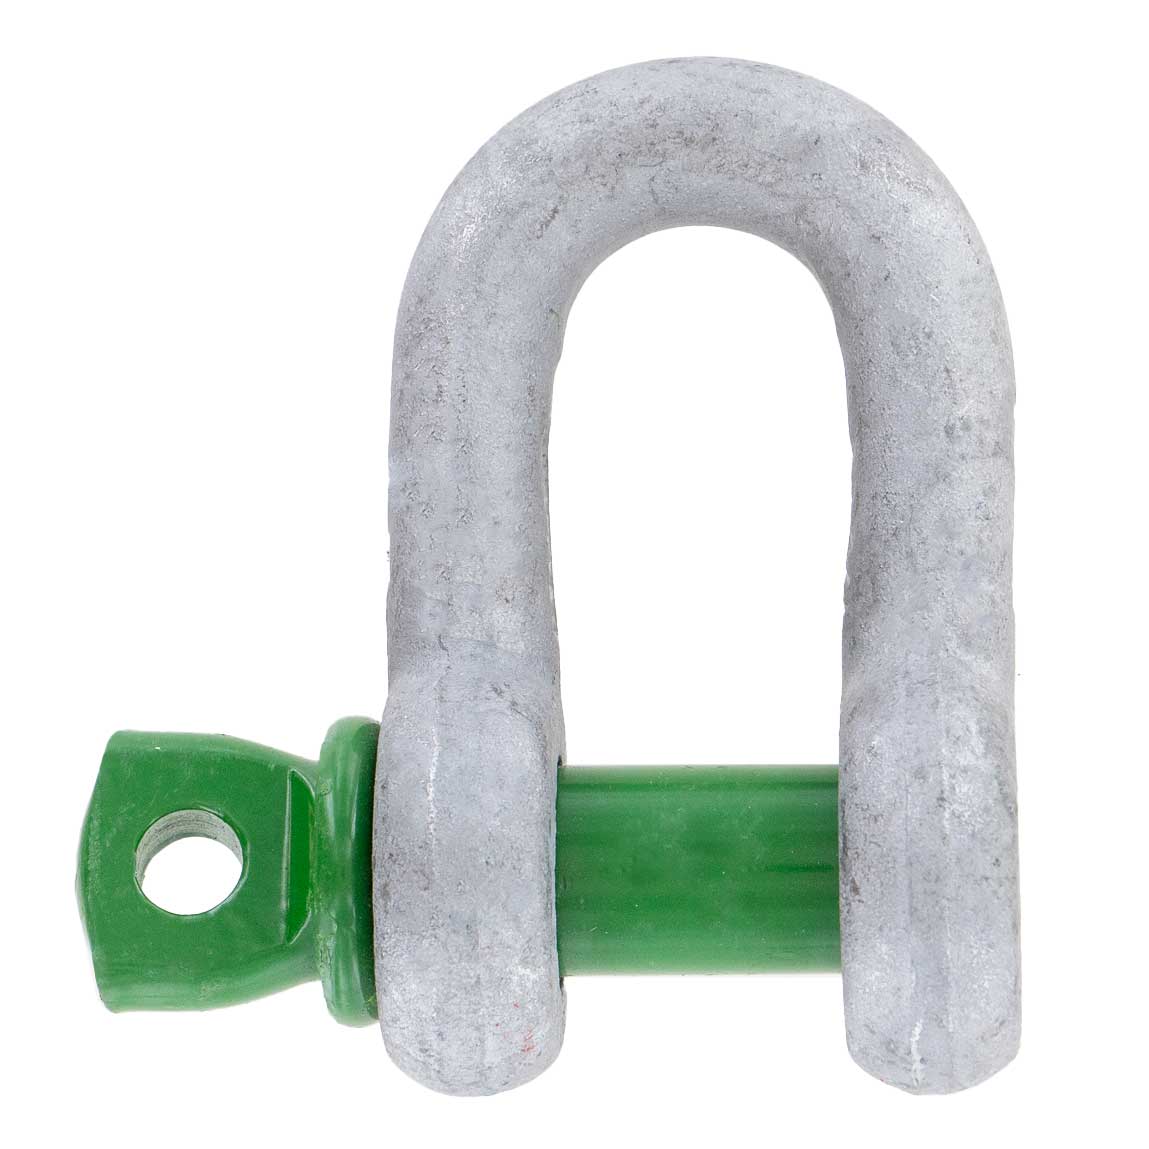 3/4" Van Beest Green Pin® Screw Pin Chain Shackle | G-4151 - 4.75 Ton rear view